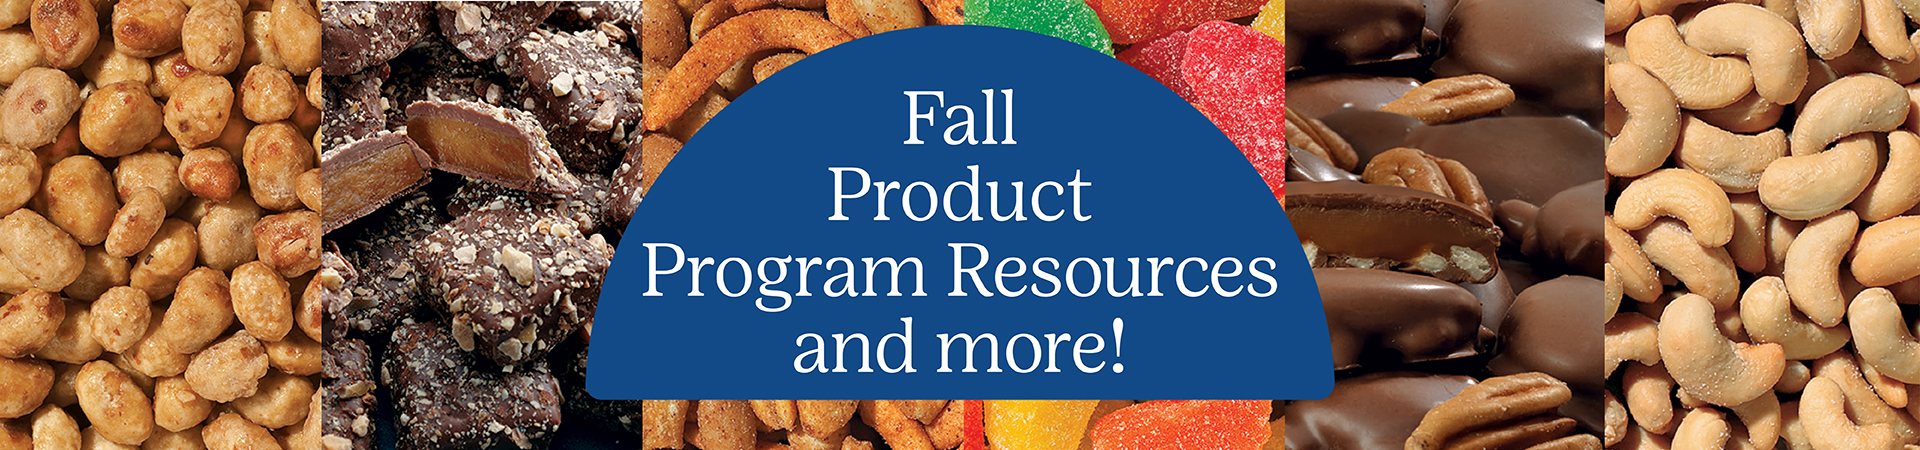  girl scout fall product resources graphic 